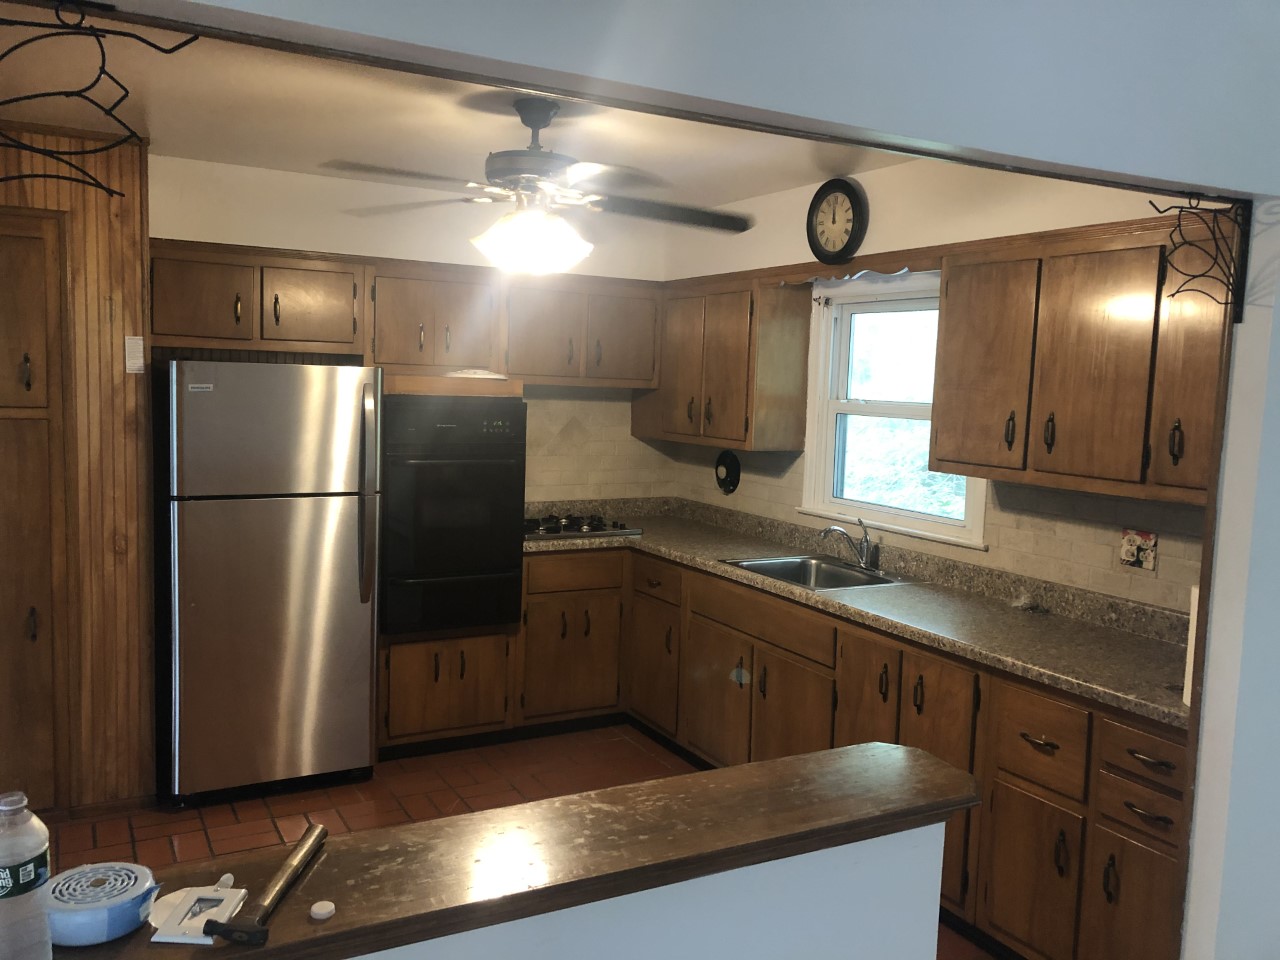  Renovated 2 Bedroom Apartment for Rent in Ozone Park. Features Living Room, Dining Room, Eat-in-Kitchen, a Small Office and Full Bathrooms. Hardwood Flooring Throughout. Heat and Water Included. Nearby Buses: Q7, Q11, Q21, Q41, Q52-SBS, Q53-SBS Nearby Train: A